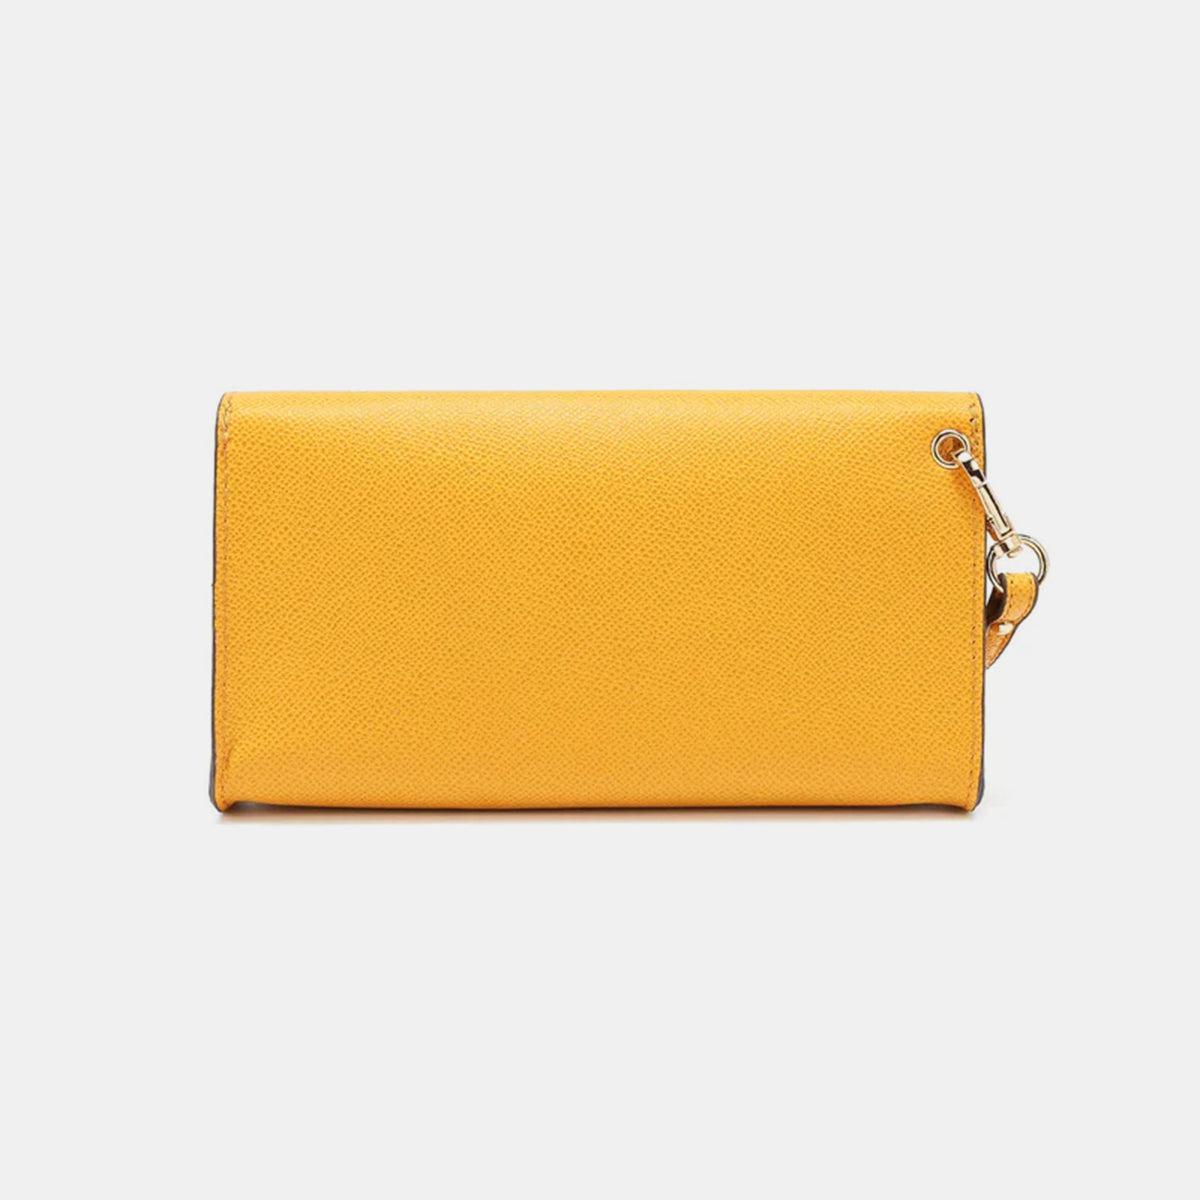 a yellow wallet with a chain hanging from it